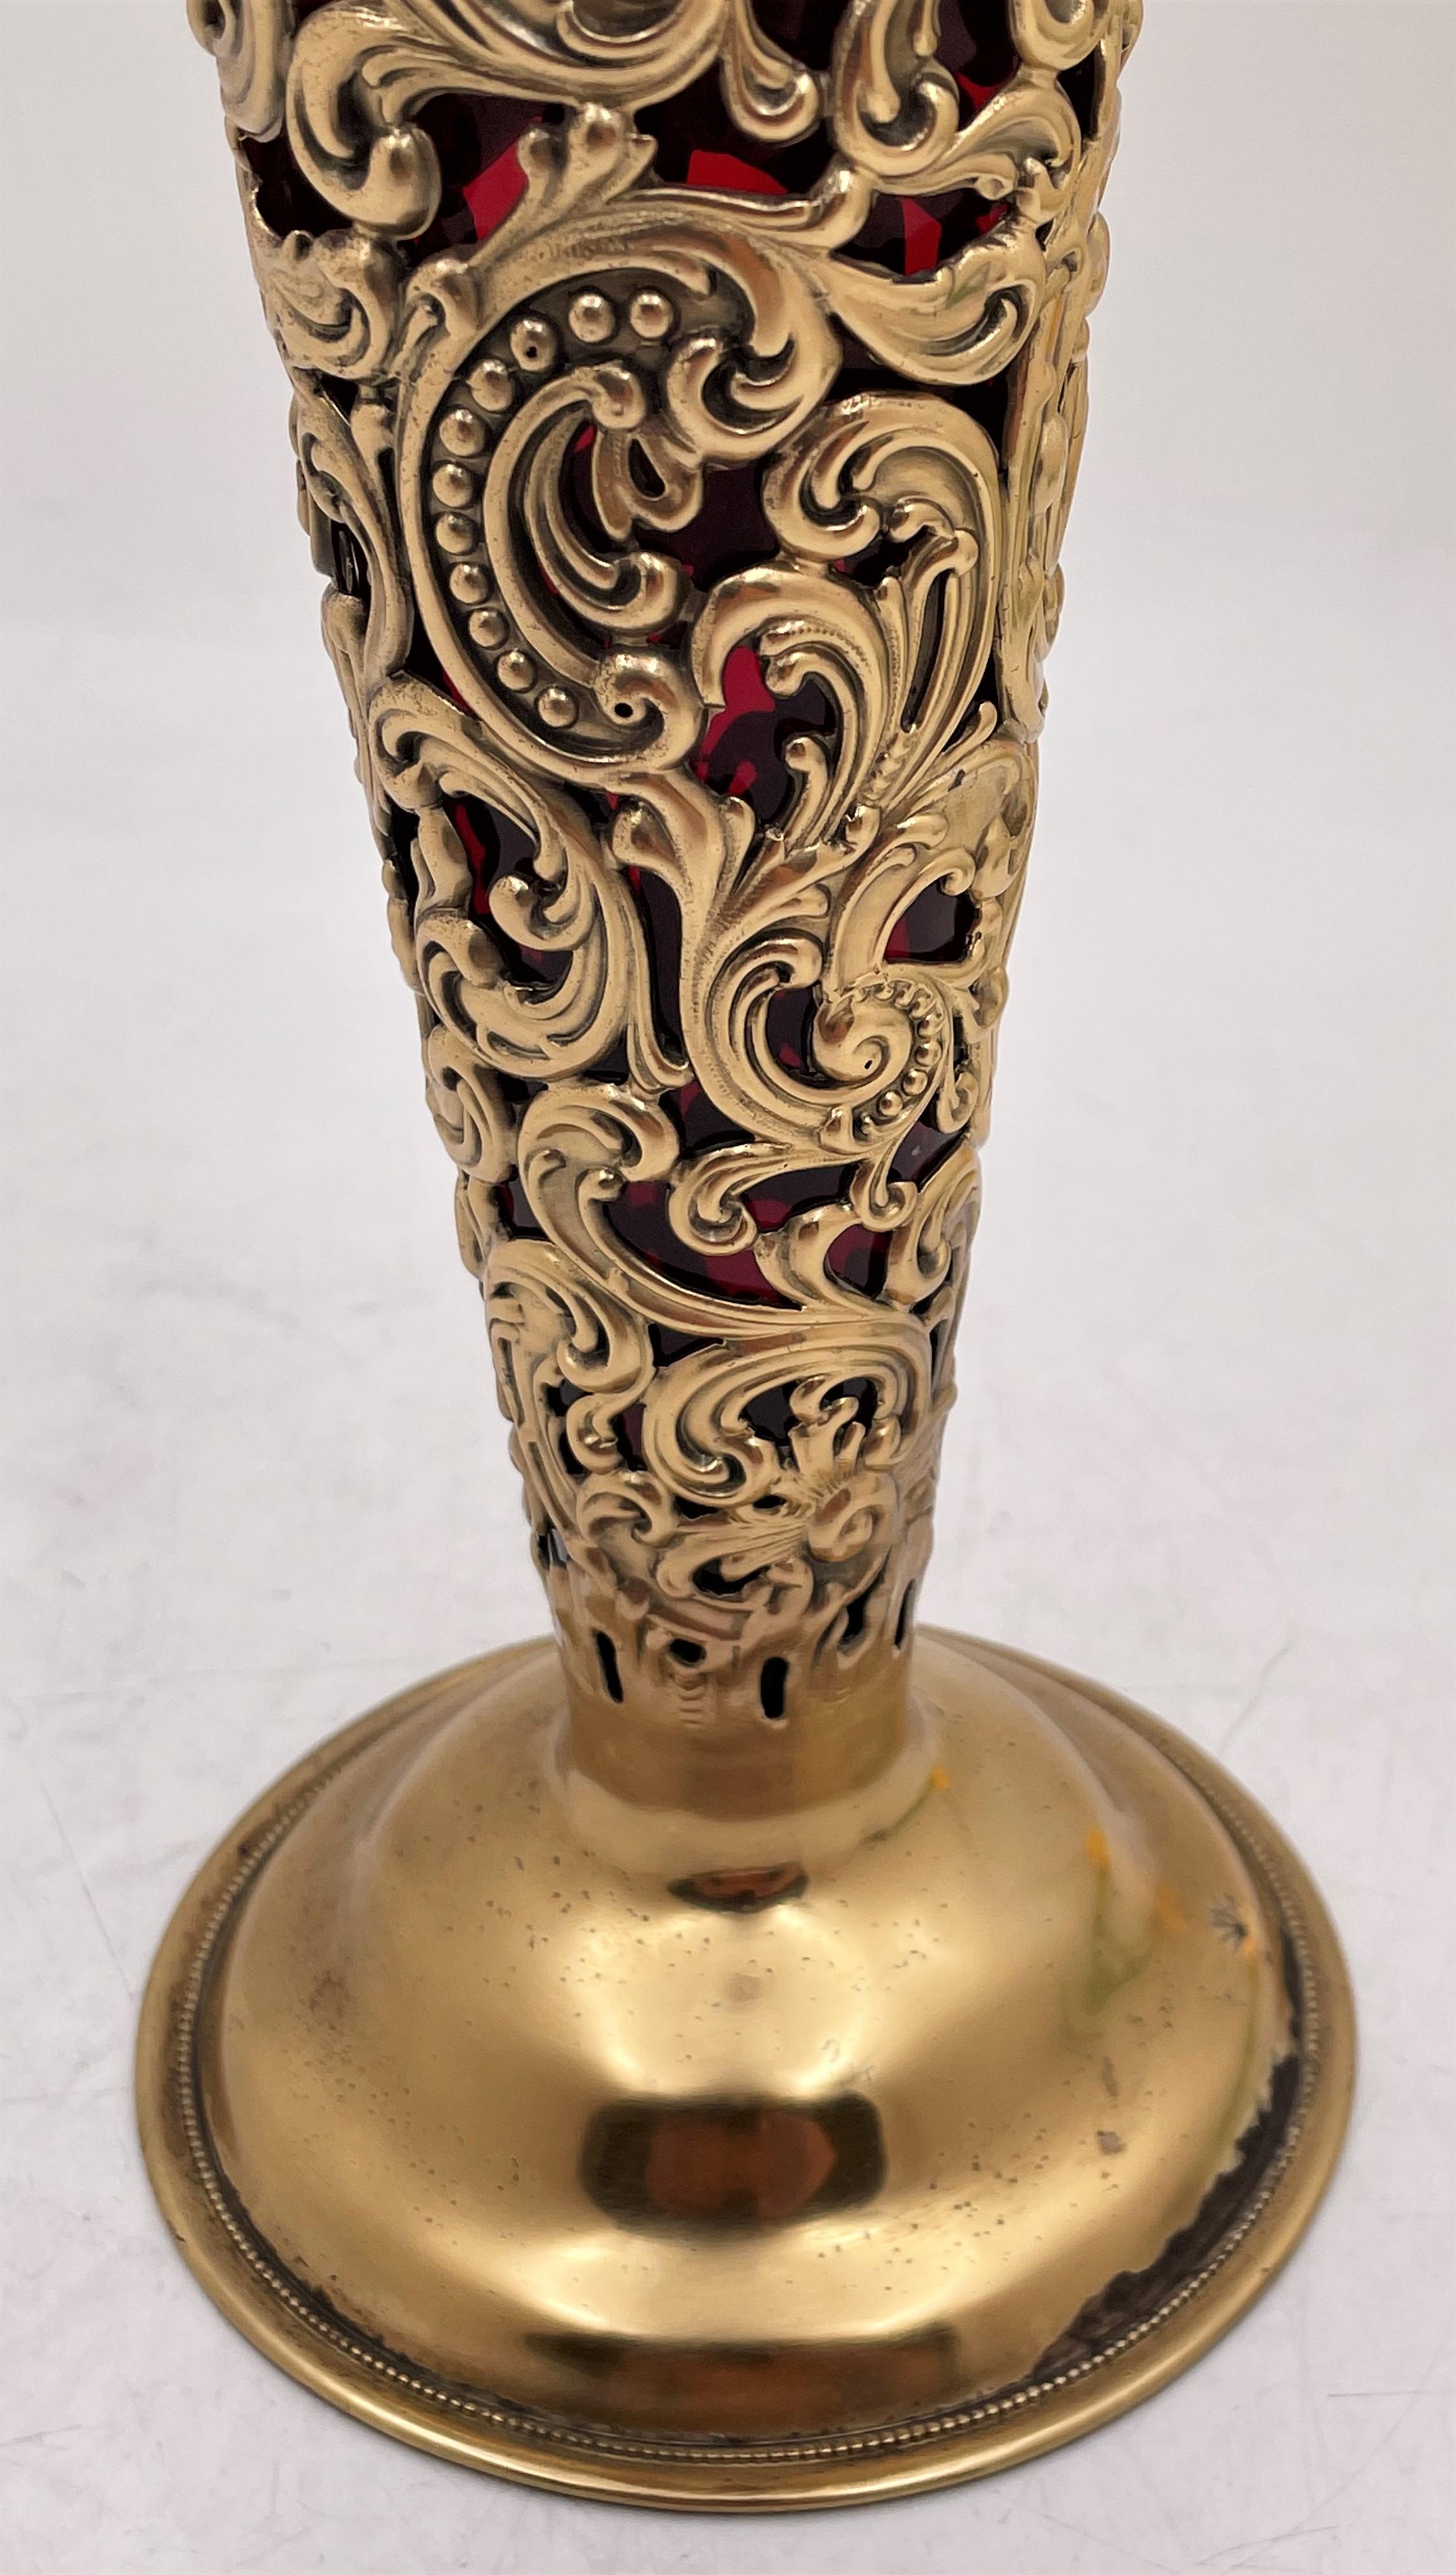 Late 19th Century Dominick & Haff 1898 Vermeil Gilt Sterling Silver Vase with Glass Liner For Sale